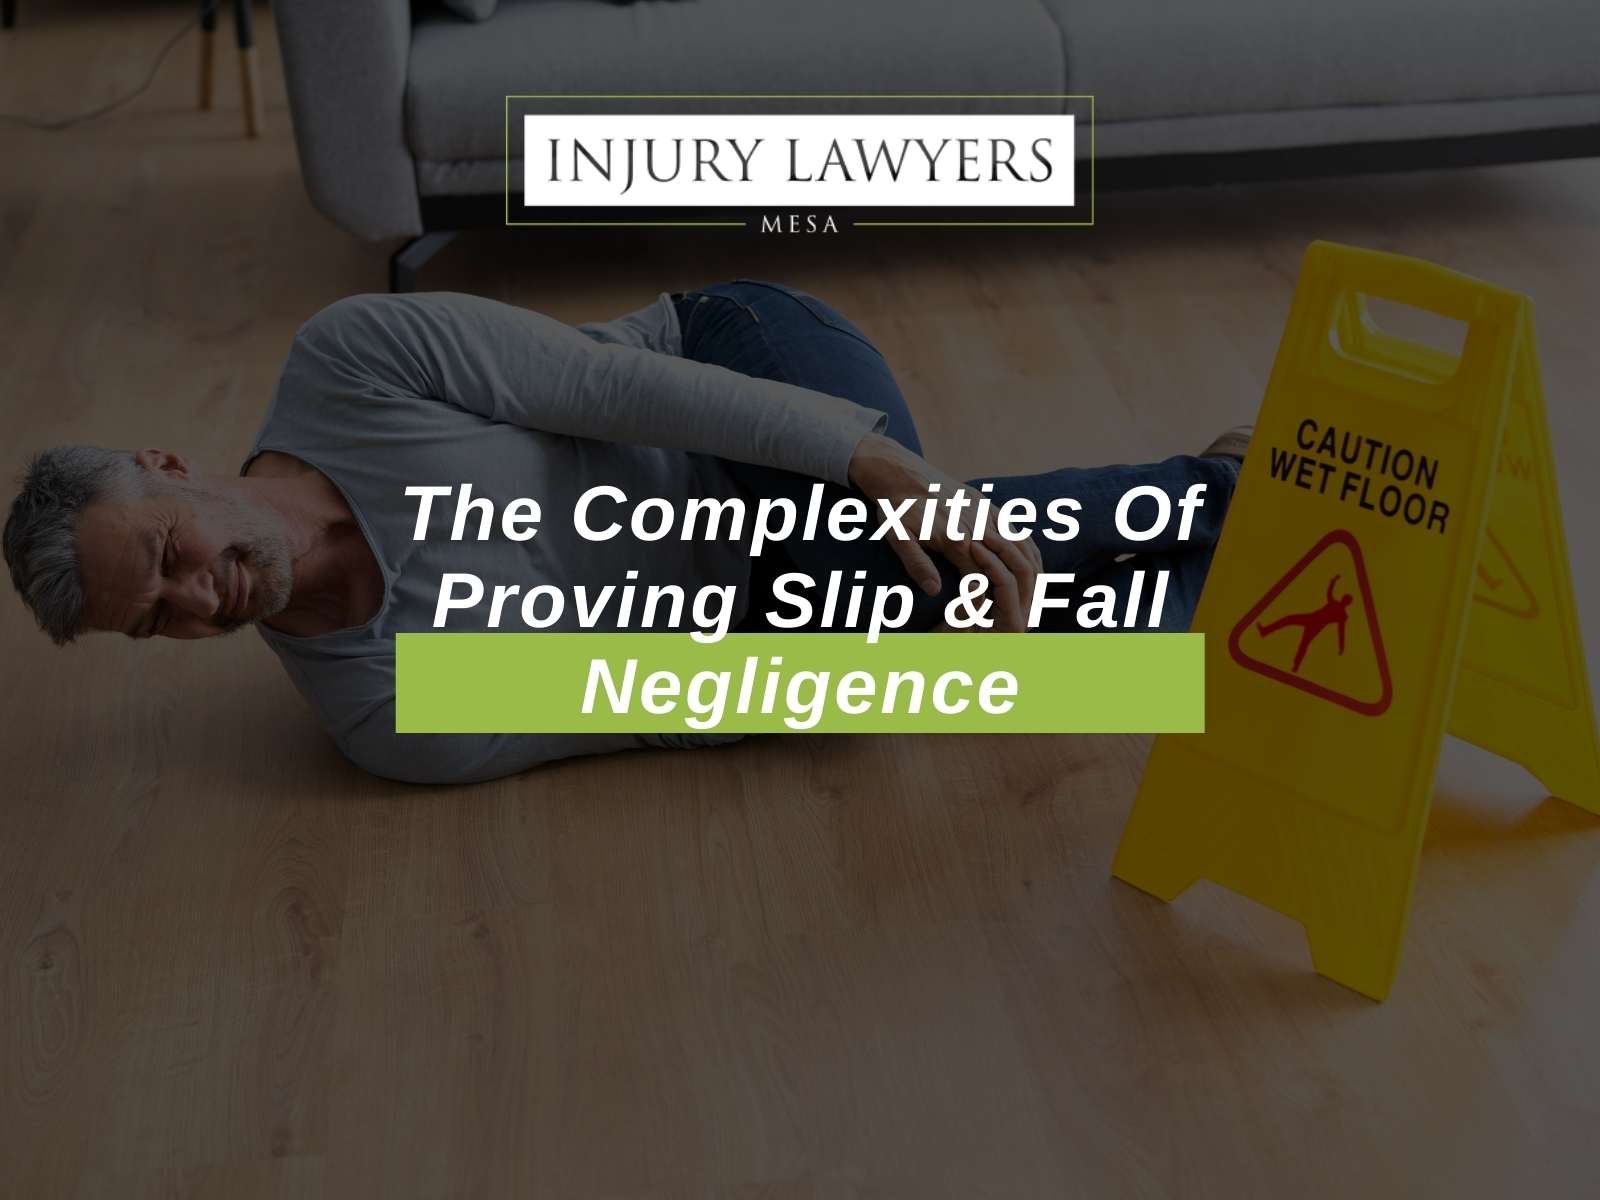 The Complexities Of Proving Slip & Fall Negligence